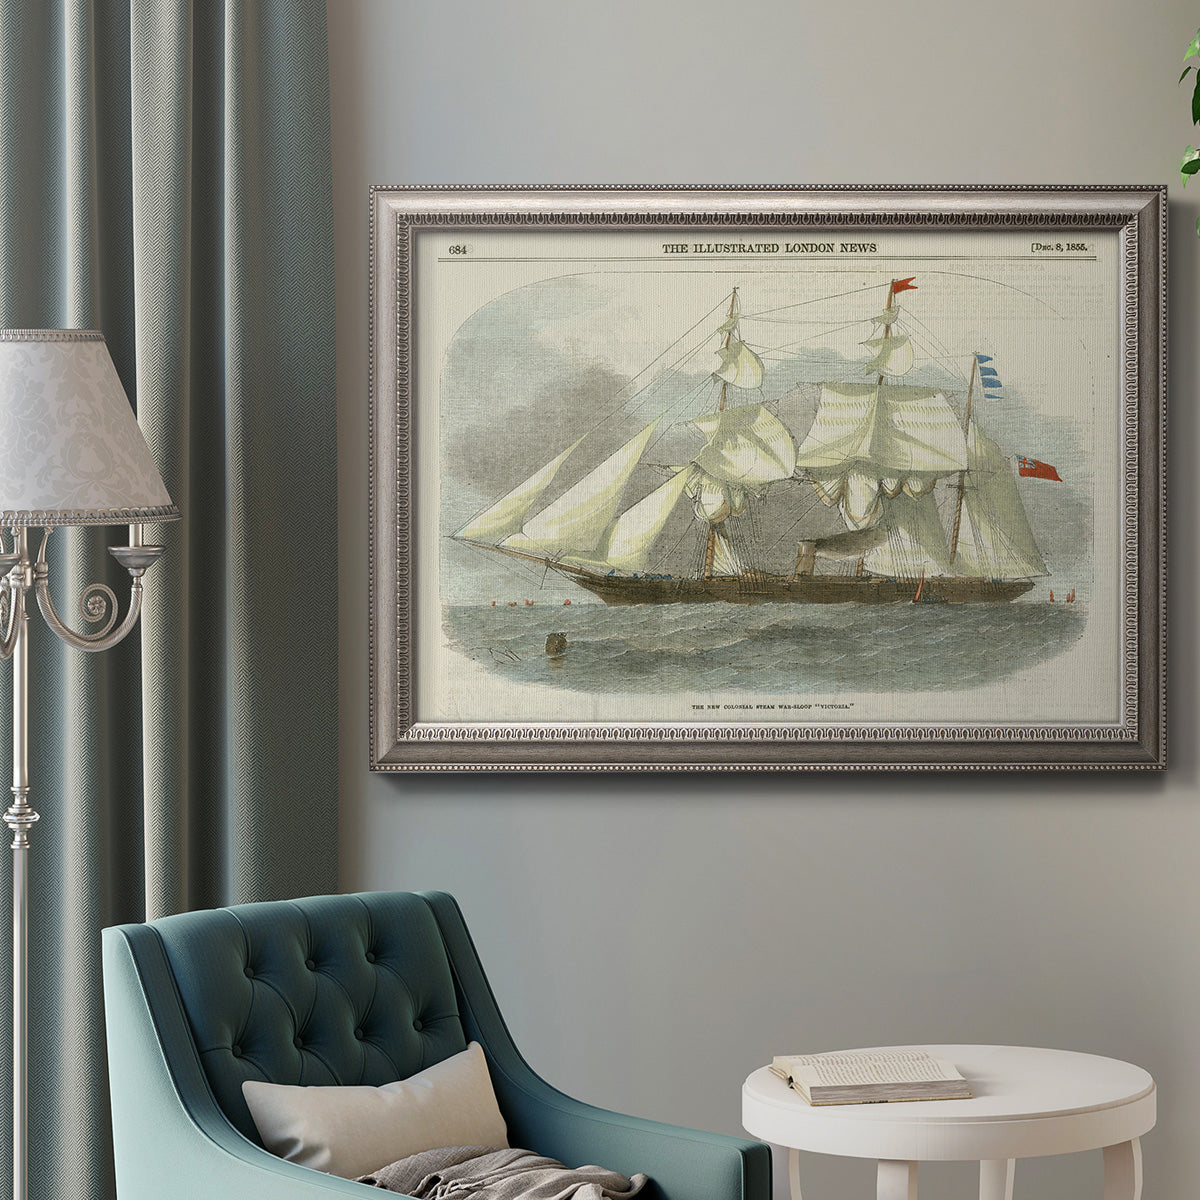 Antique Clipper Ship III Premium Framed Canvas- Ready to Hang